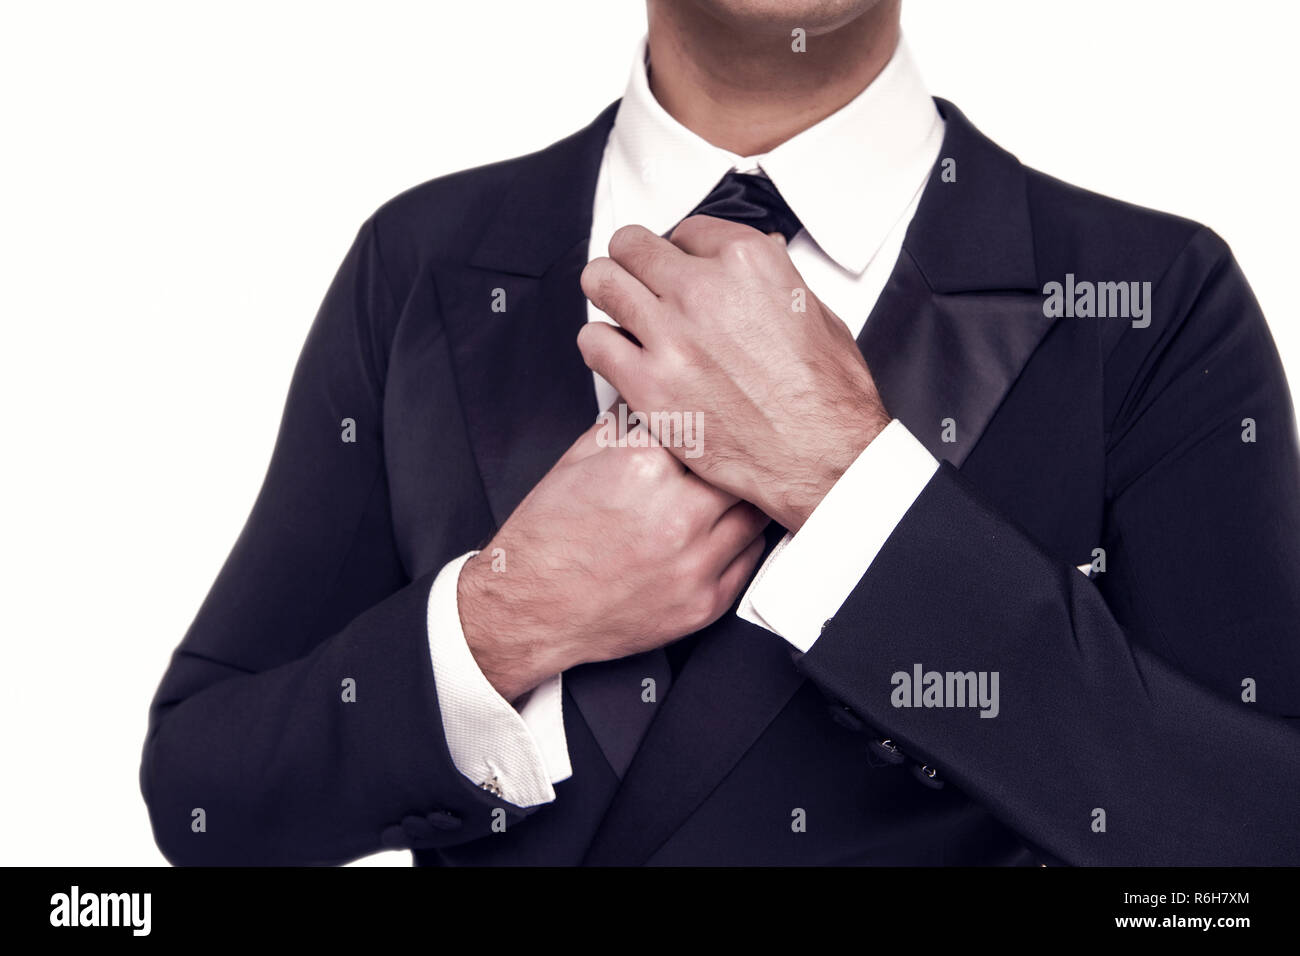 Black Guy Suit High Resolution Stock Photography and Images - Alamy